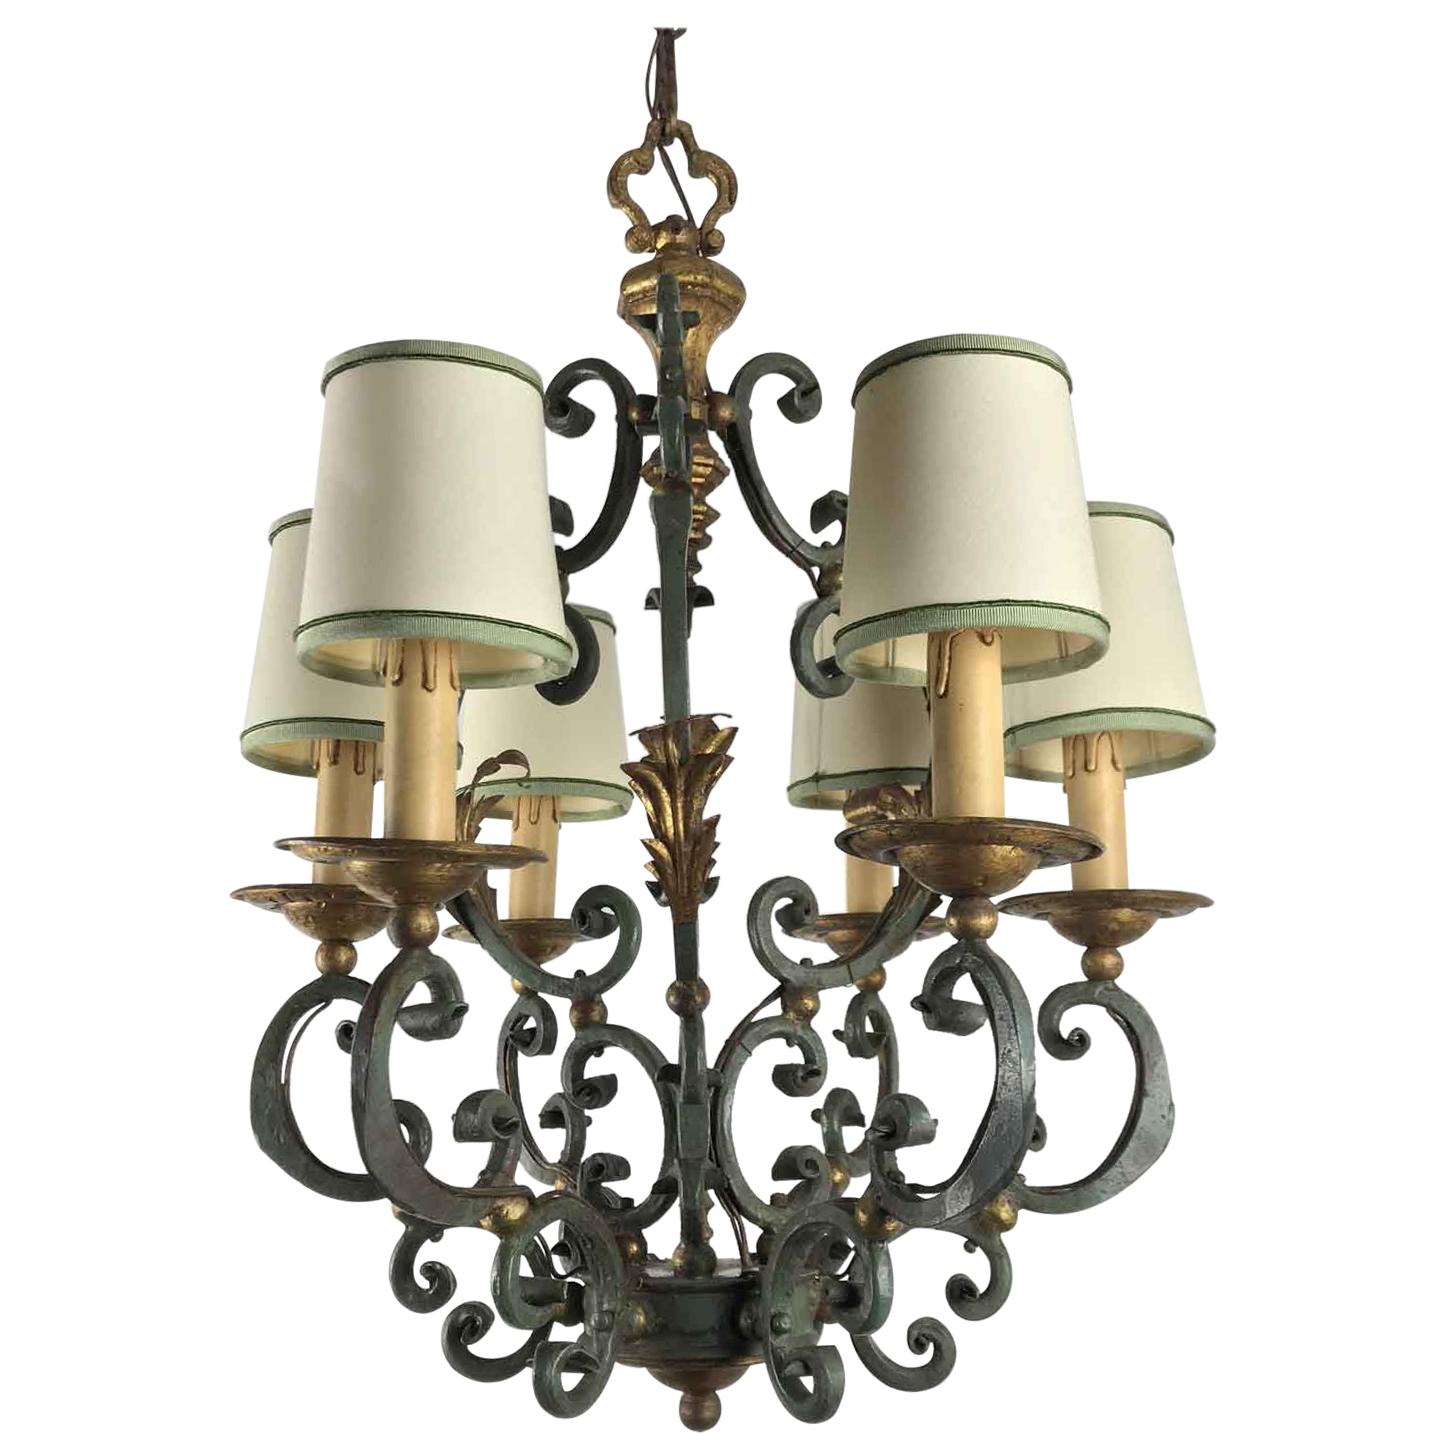 20th Century Italian Gray Painted Gilt-Leaf Wrought Iron Chandelier